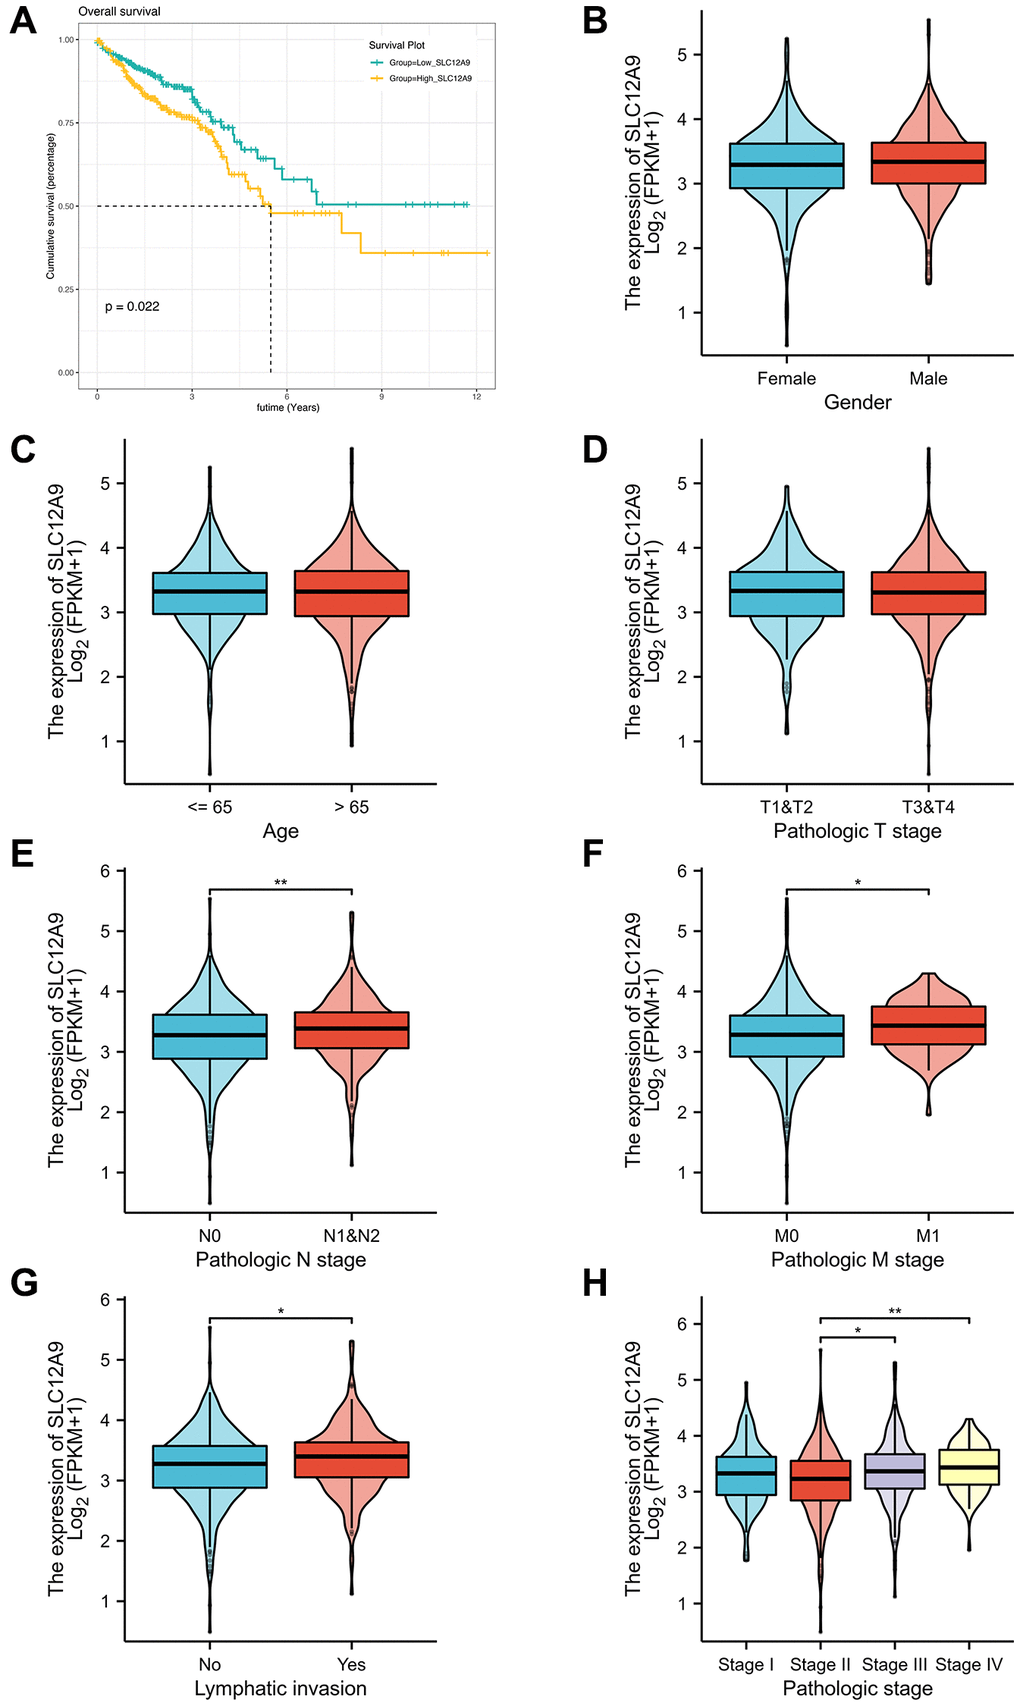 Prognostic and clinical correlation analysis of SLC12A9 gene. (A) Survival analysis showed that high expression of SLC12A9 was associated with poor prognosis in colorectal cancer. (B–D) There were no significant abnormalities in SLC12A9 expression based on gender, age, and T stage of the patients. (E–H) SLC12A9 expression was up-regulated in patients with N1&N2 compared to N0 patients (p SLC12A9 was elevated in M1 patients compared to M0 patients (p SLC12A9 expression was higher in patients with lymph node metastasis compared to those without, and it was also higher in Stage III and Stage IV patients compared to Stage II patients (p 